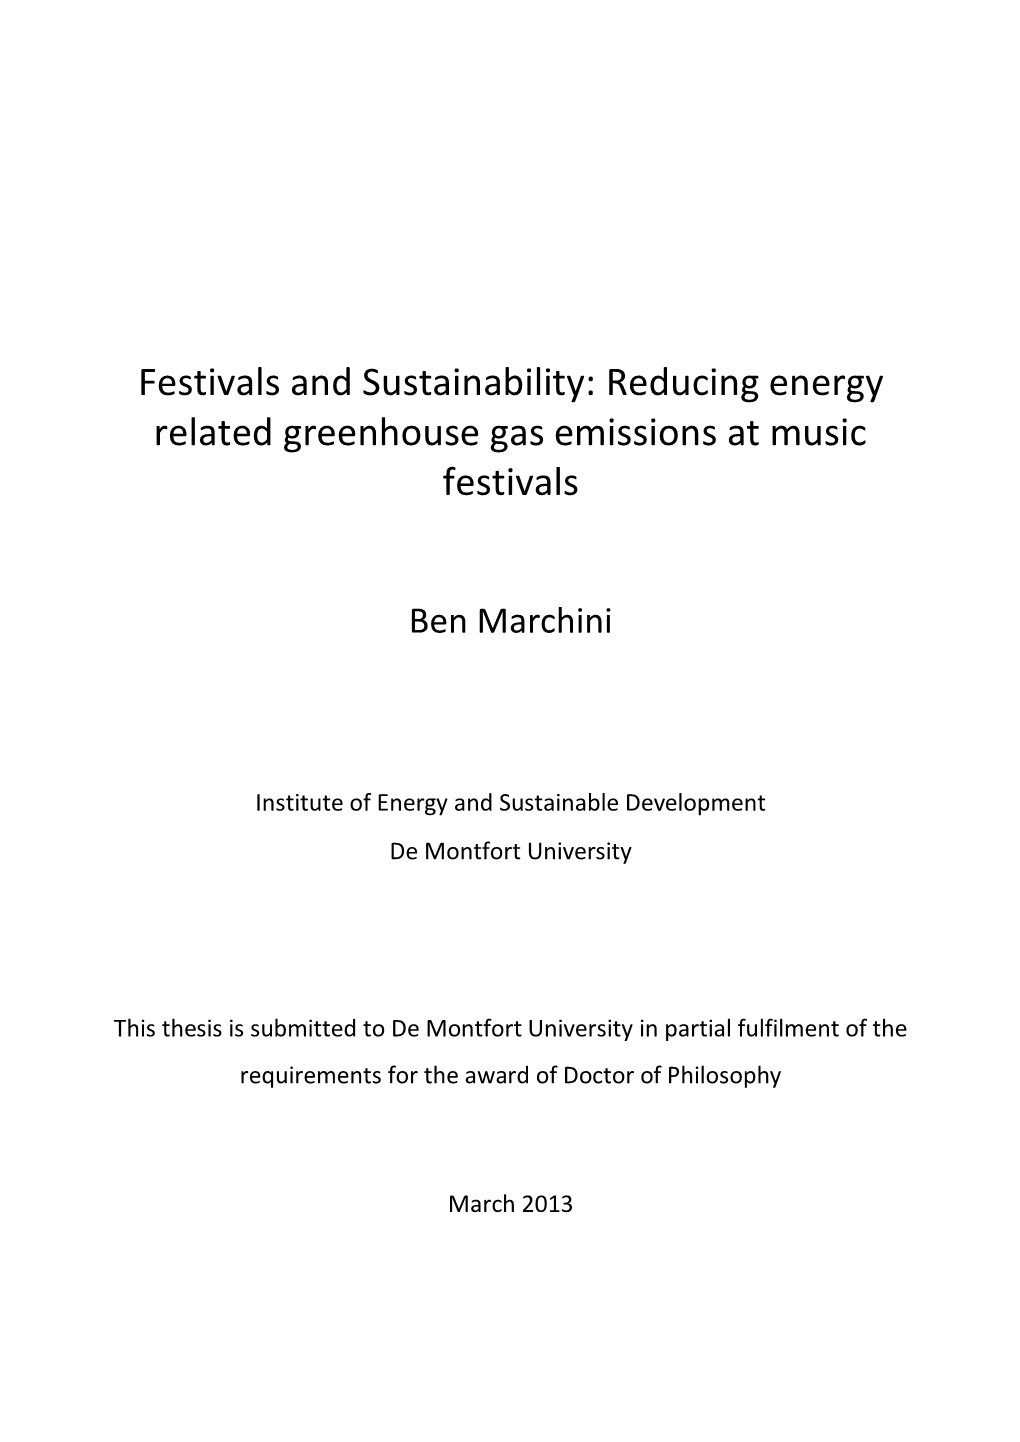 Reducing Energy Related Greenhouse Gas Emissions at Music Festivals